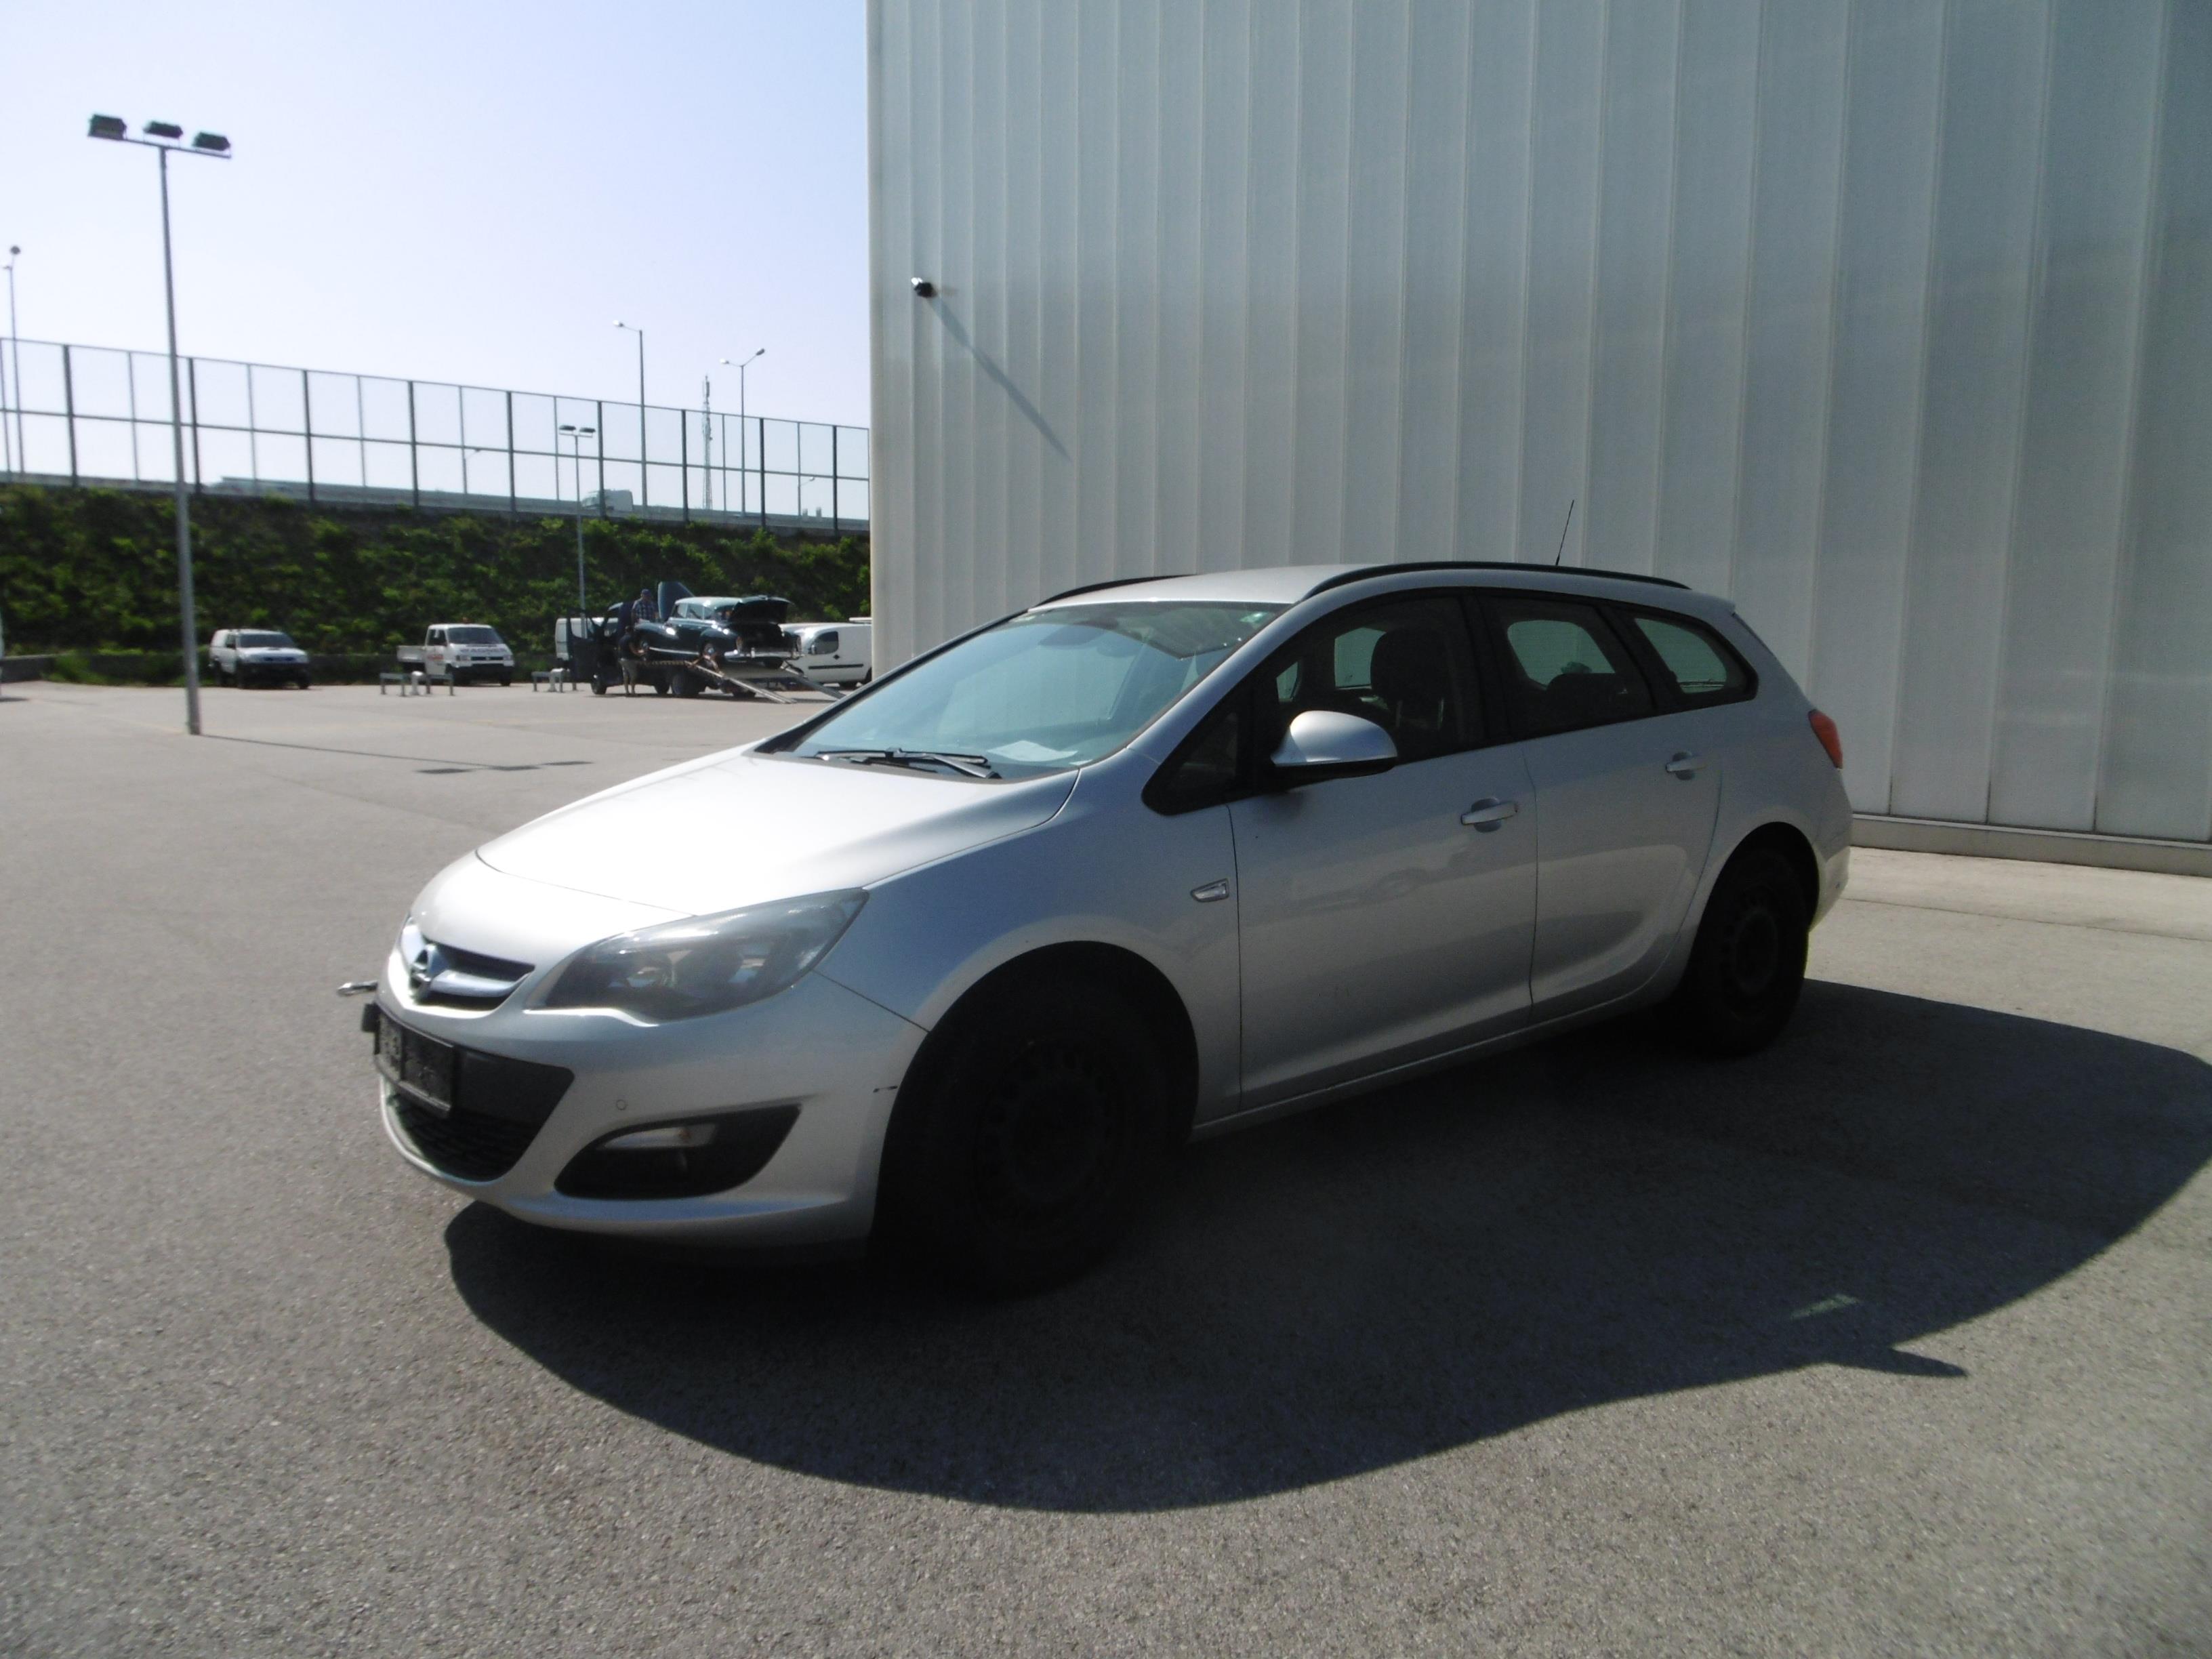 Opel Astra Sports Tourer wagon restyling